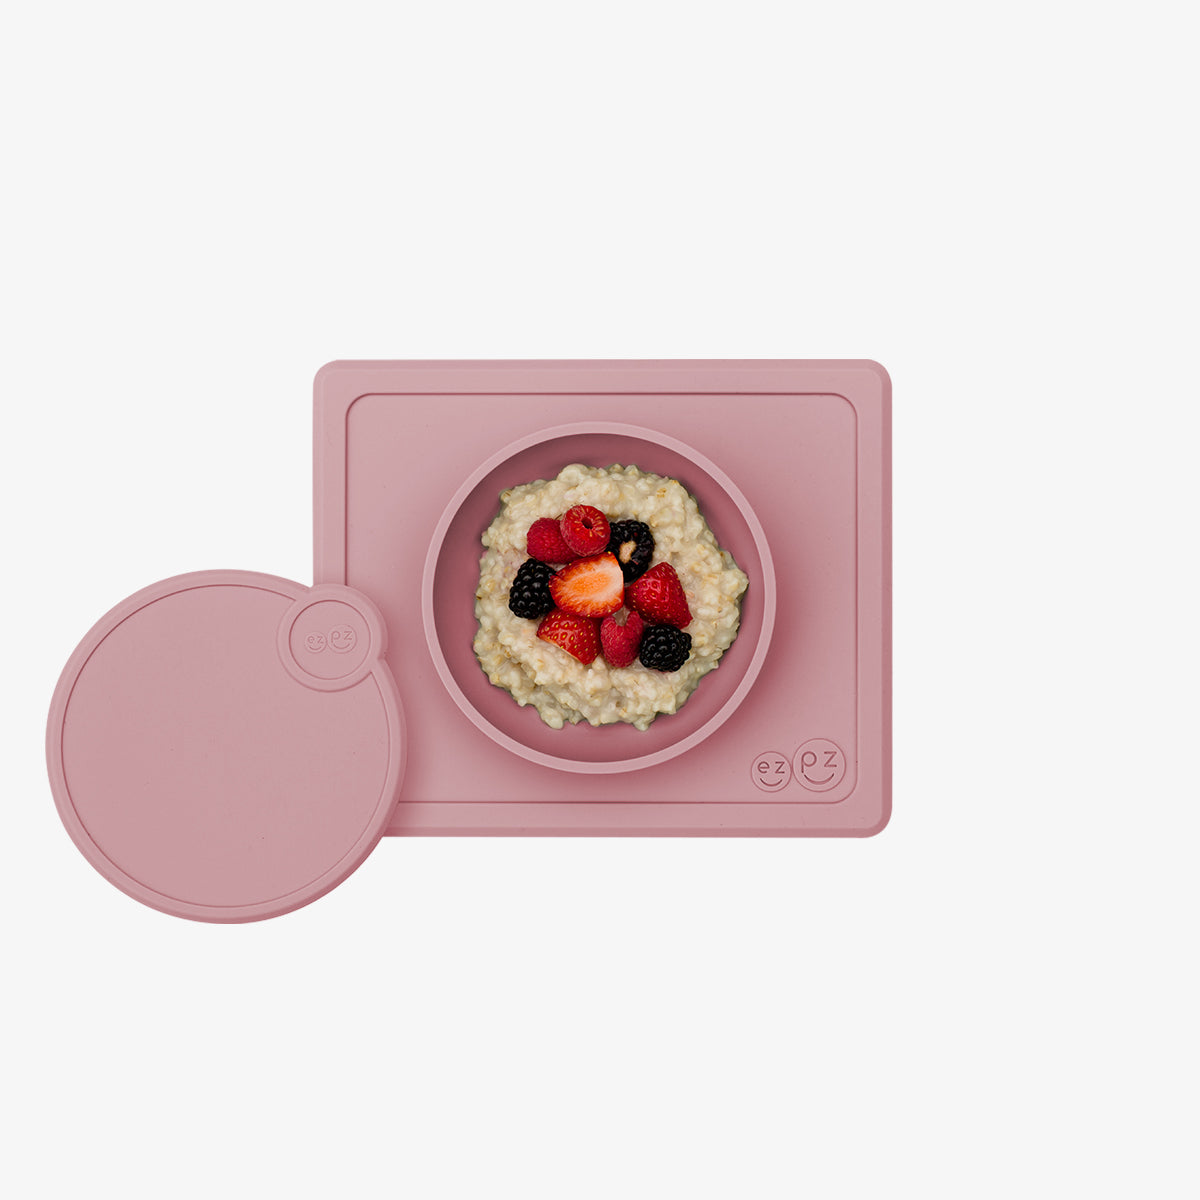 Mini Bowl Lid in Blush by ezpz / The Original All-In-One Silicone Plates & Placemats that Stick to the Table